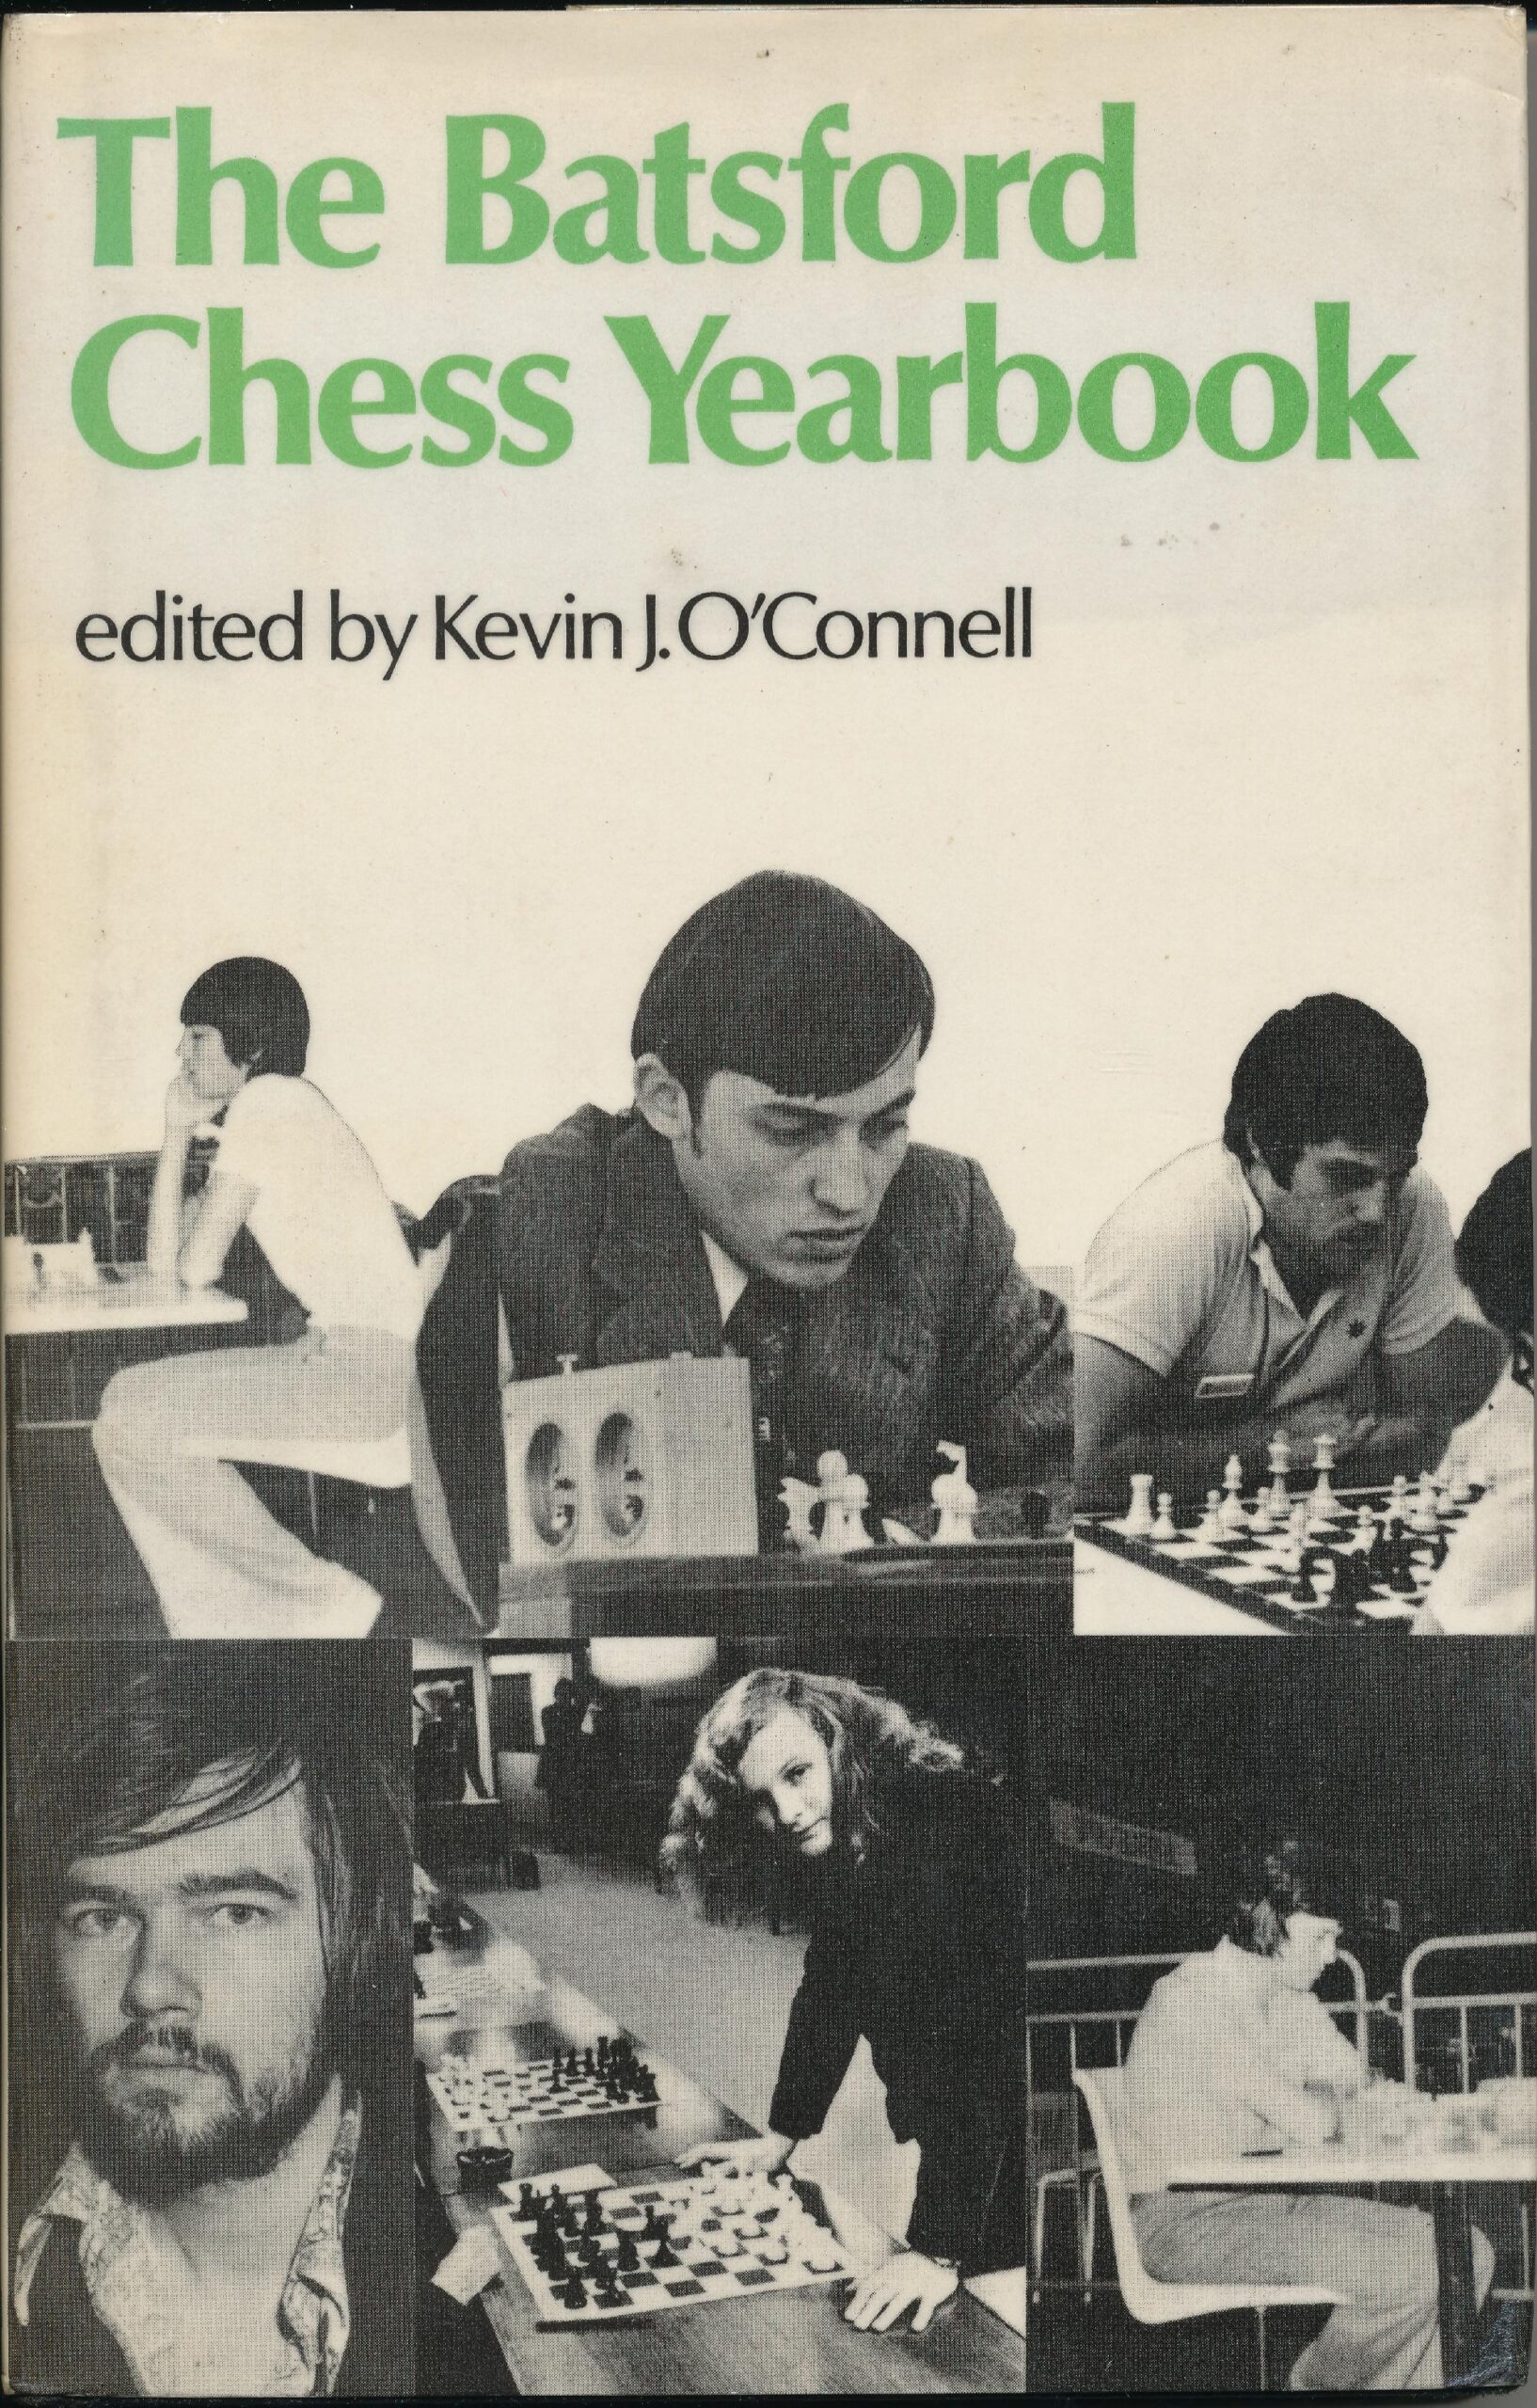 The Batsford Chess Yearbook